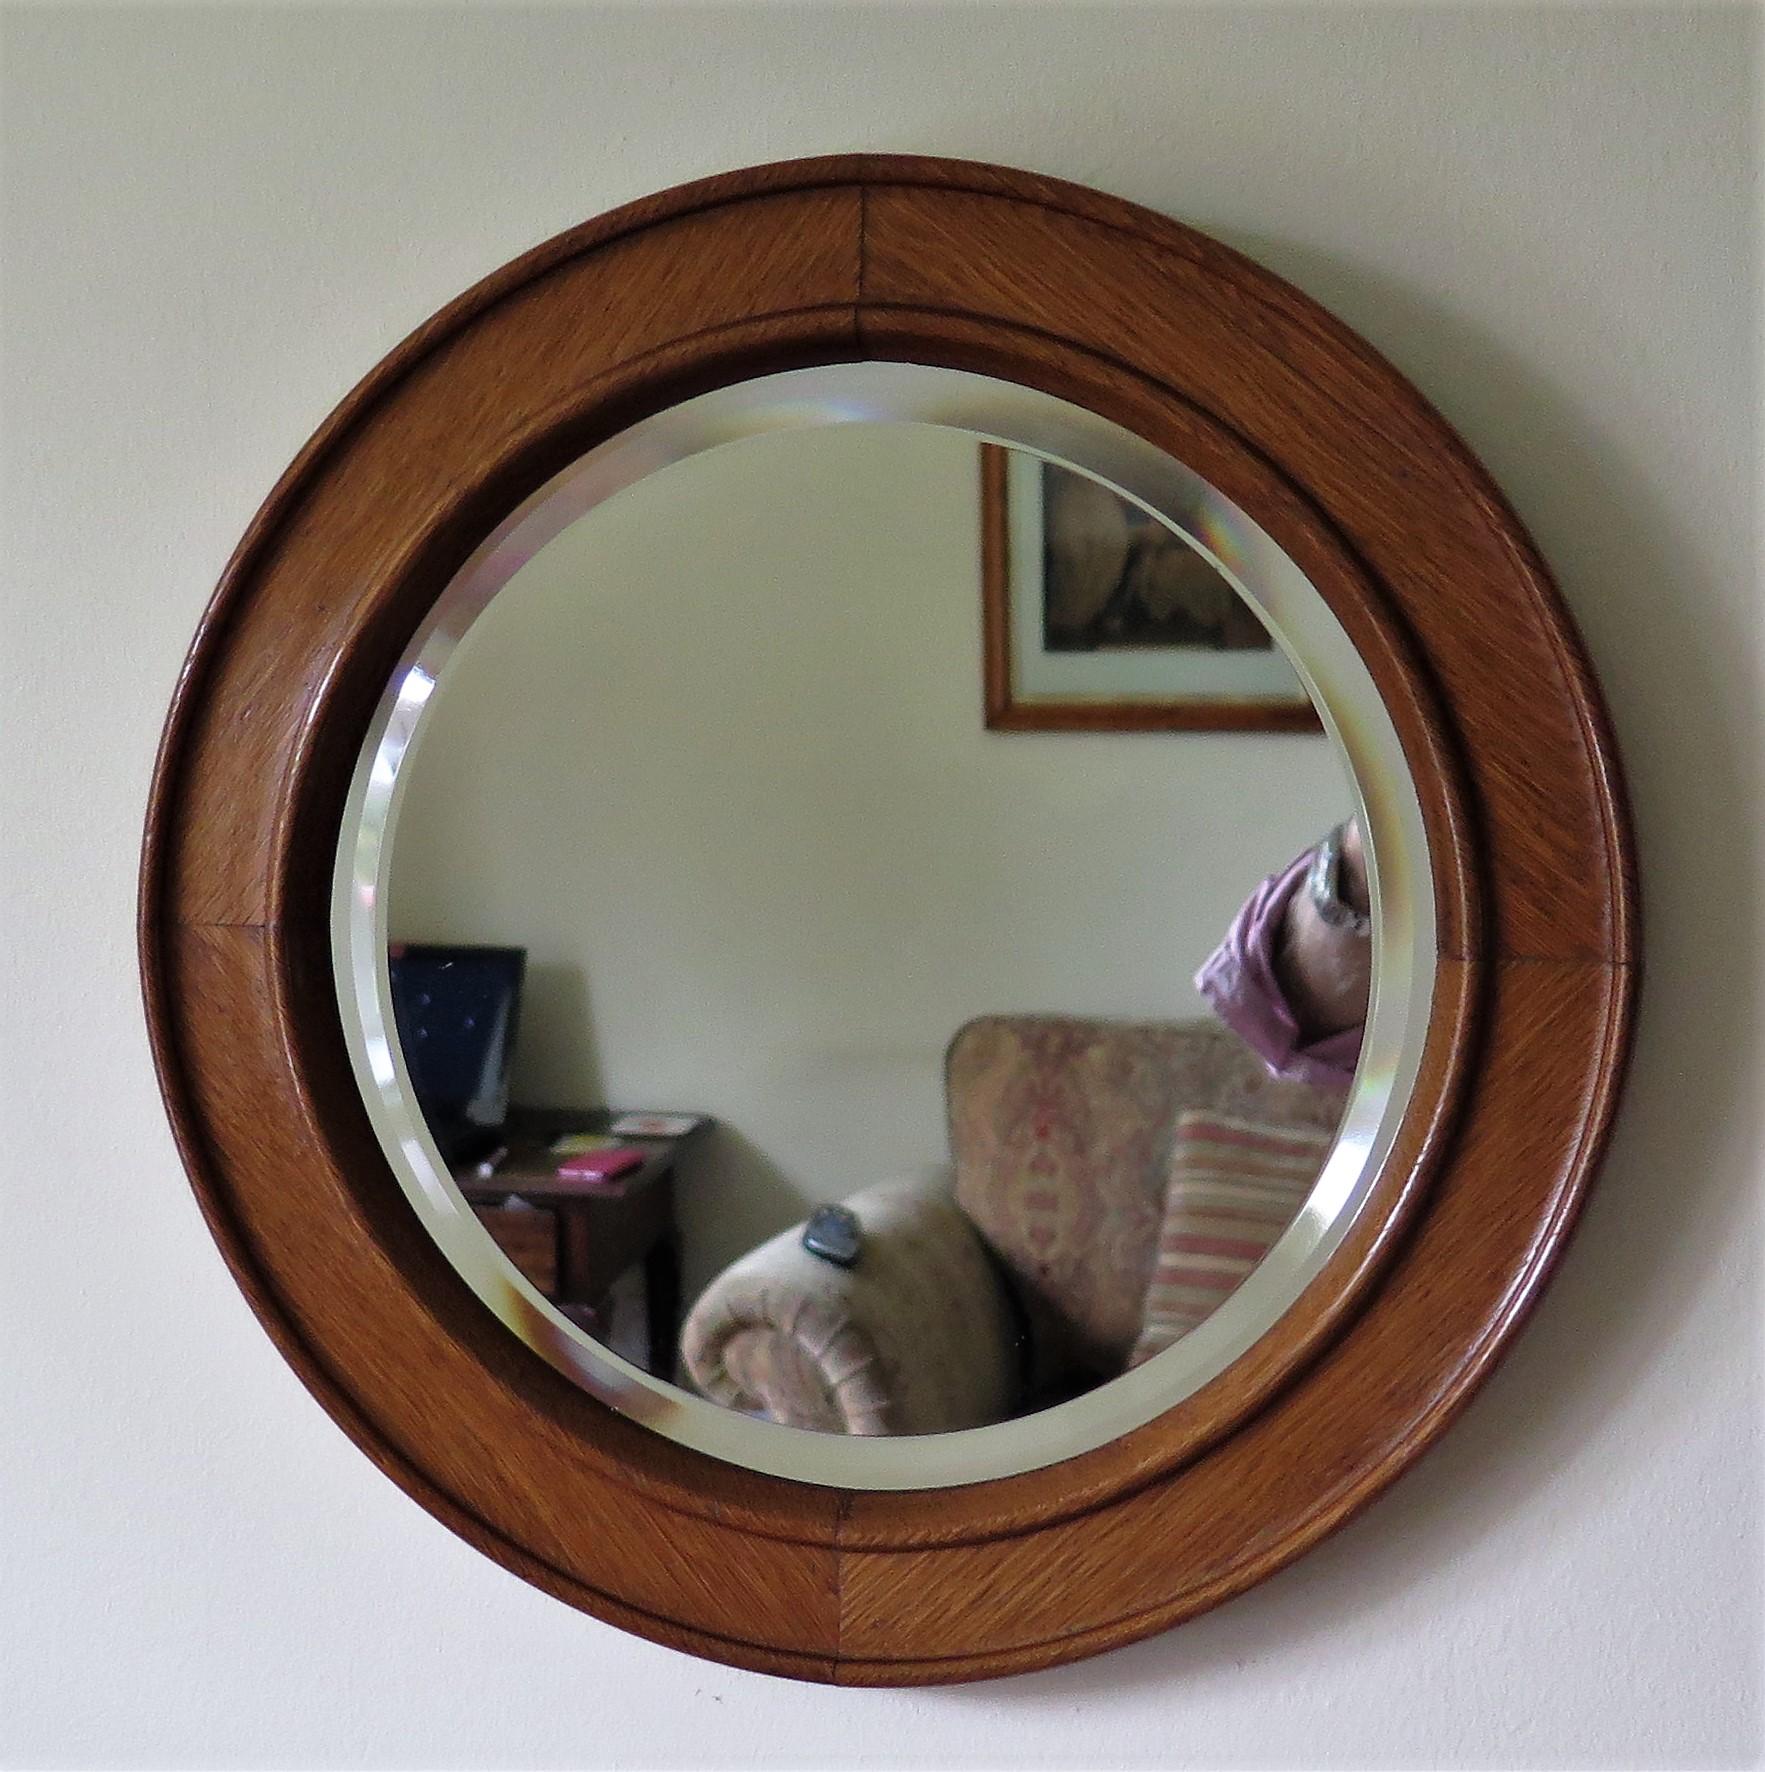 English 19th C. Arts & Crafts Circular Wall Mirror Golden Oak Jointed Frame Bevel Glass